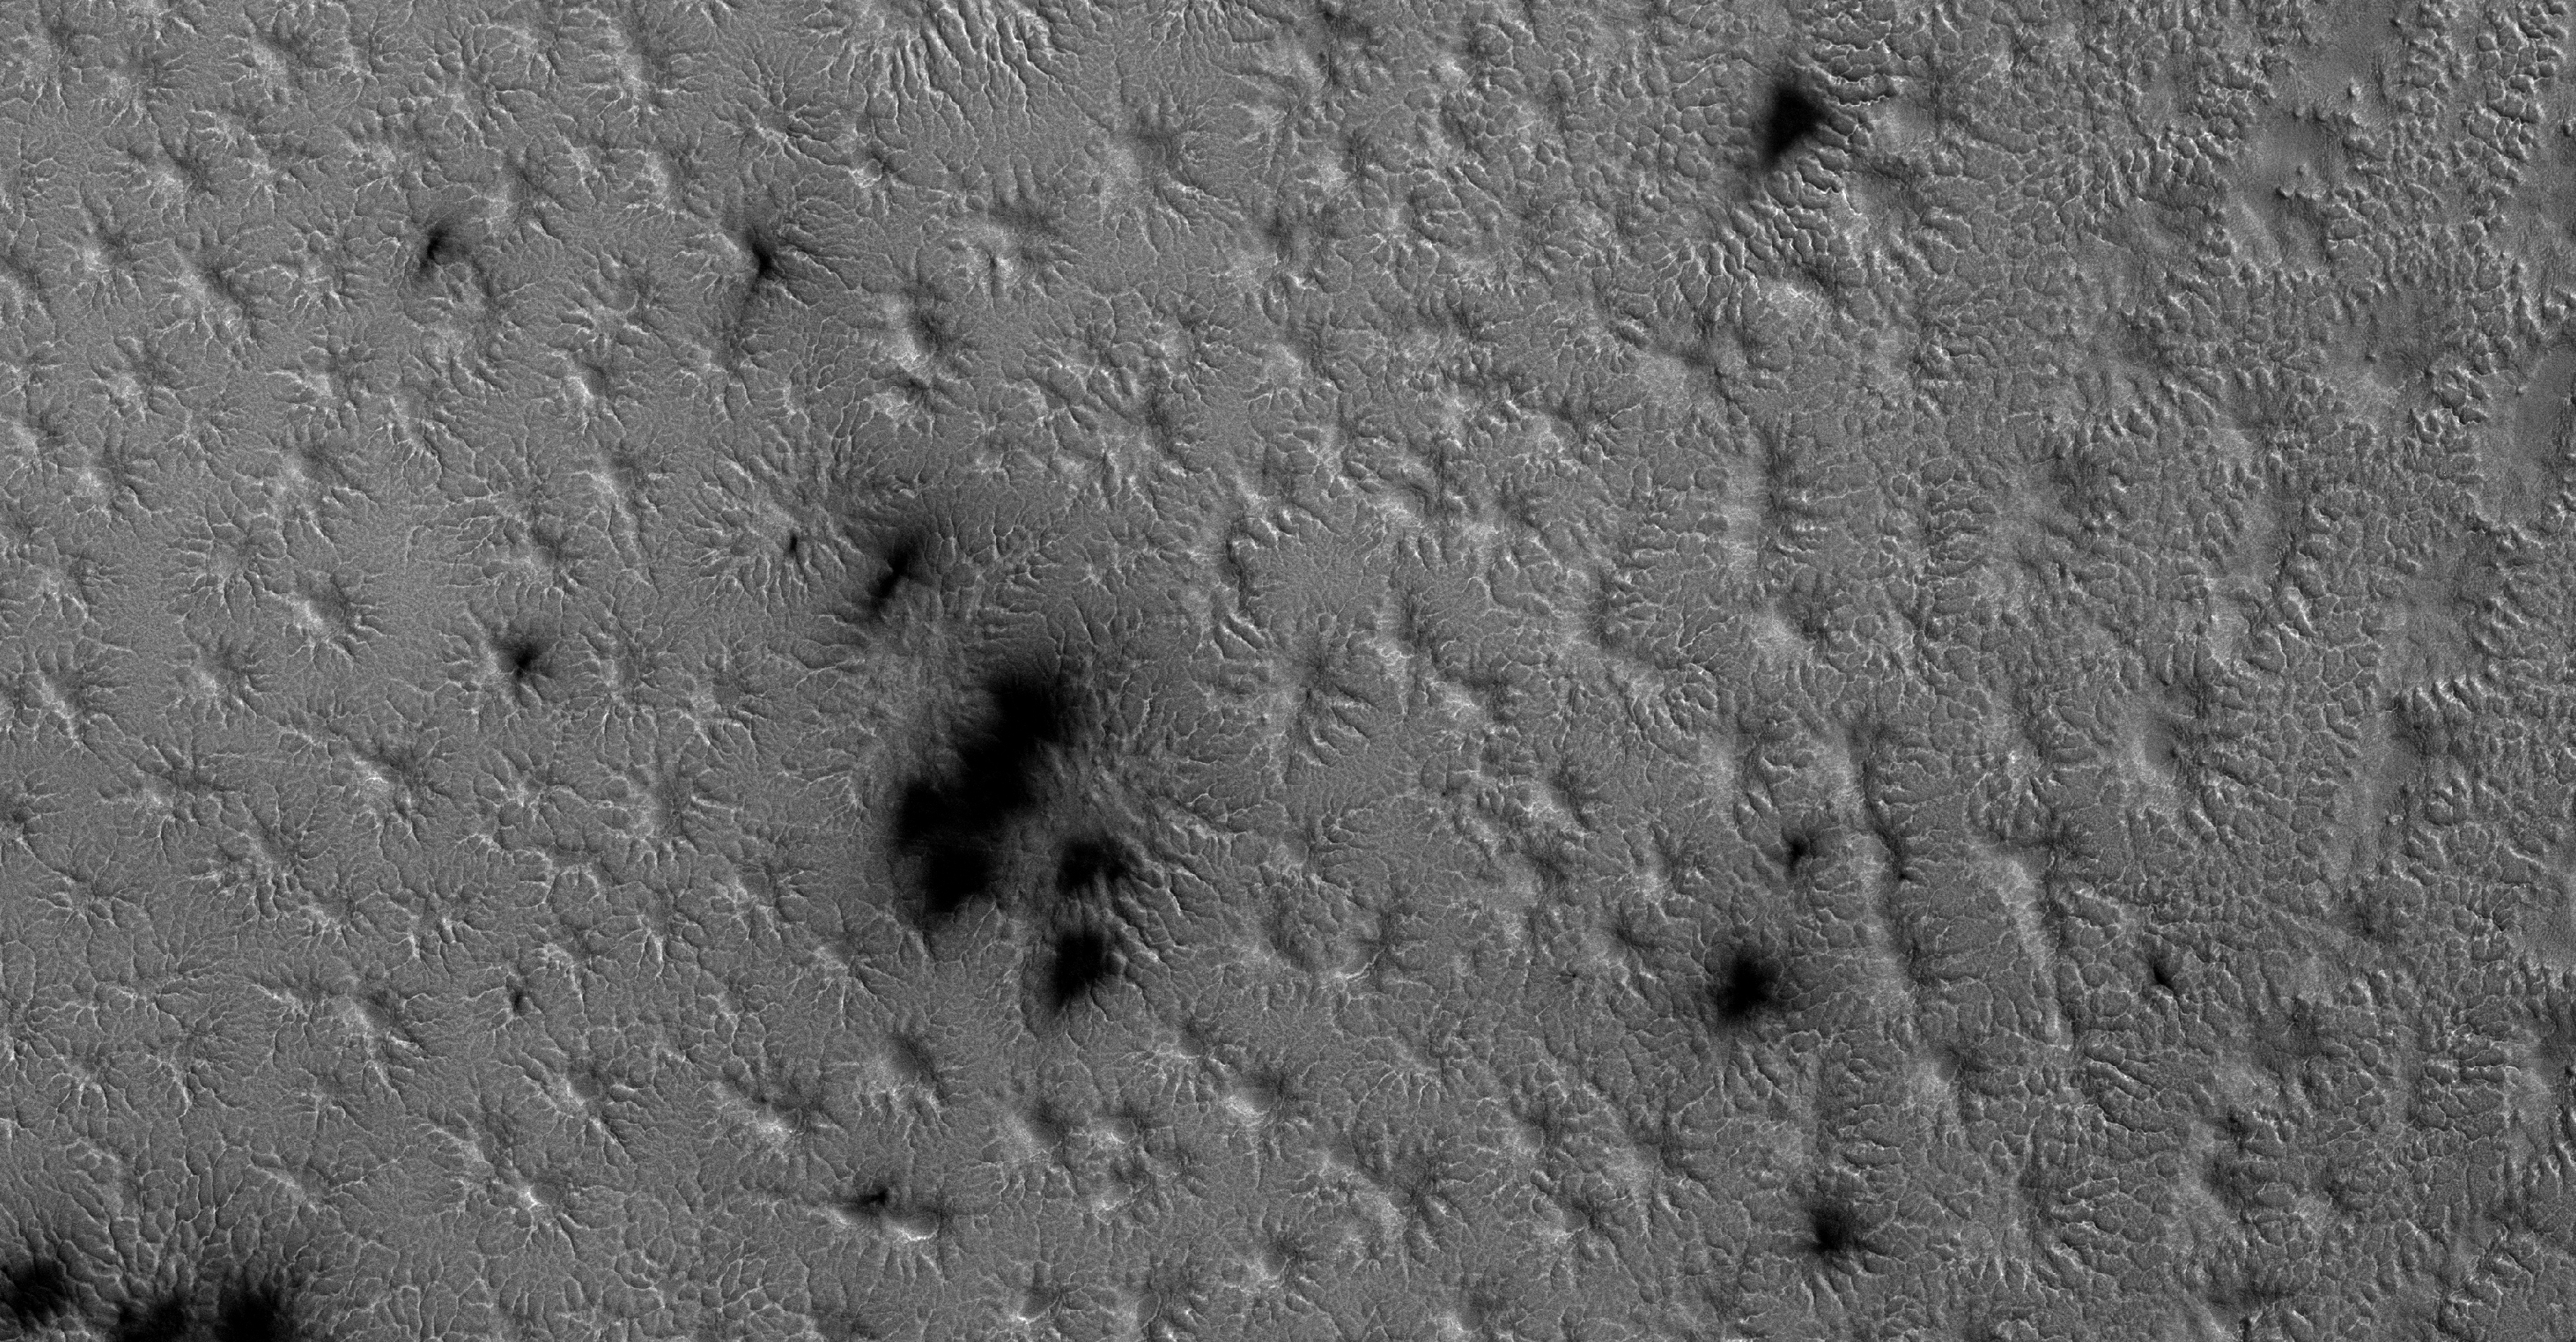 NASA Spots Eerie 'Spider' Shapes in Mars Crater View - CNET